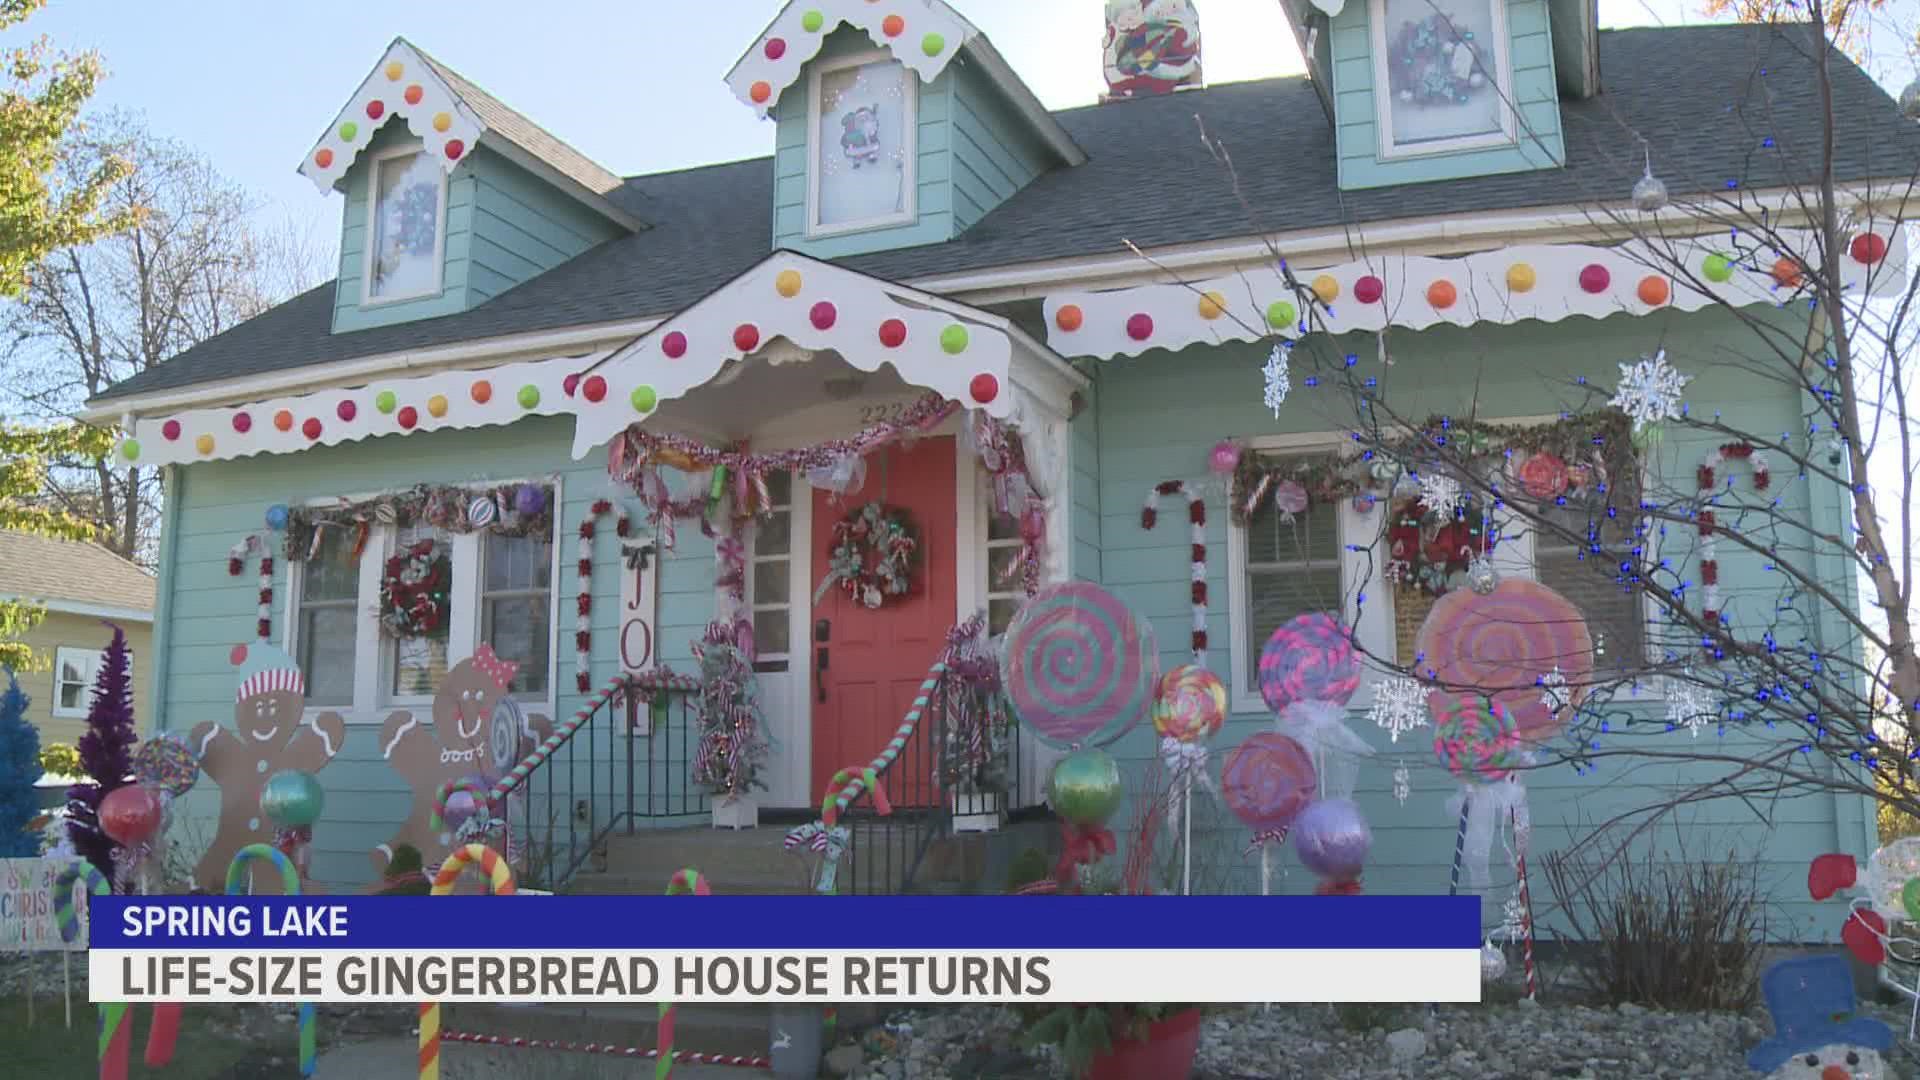 Conner Henderson died of bone cancer at 17. His family created the gingerbread house in his honor as a way to celebrate the holidays again in 2021.